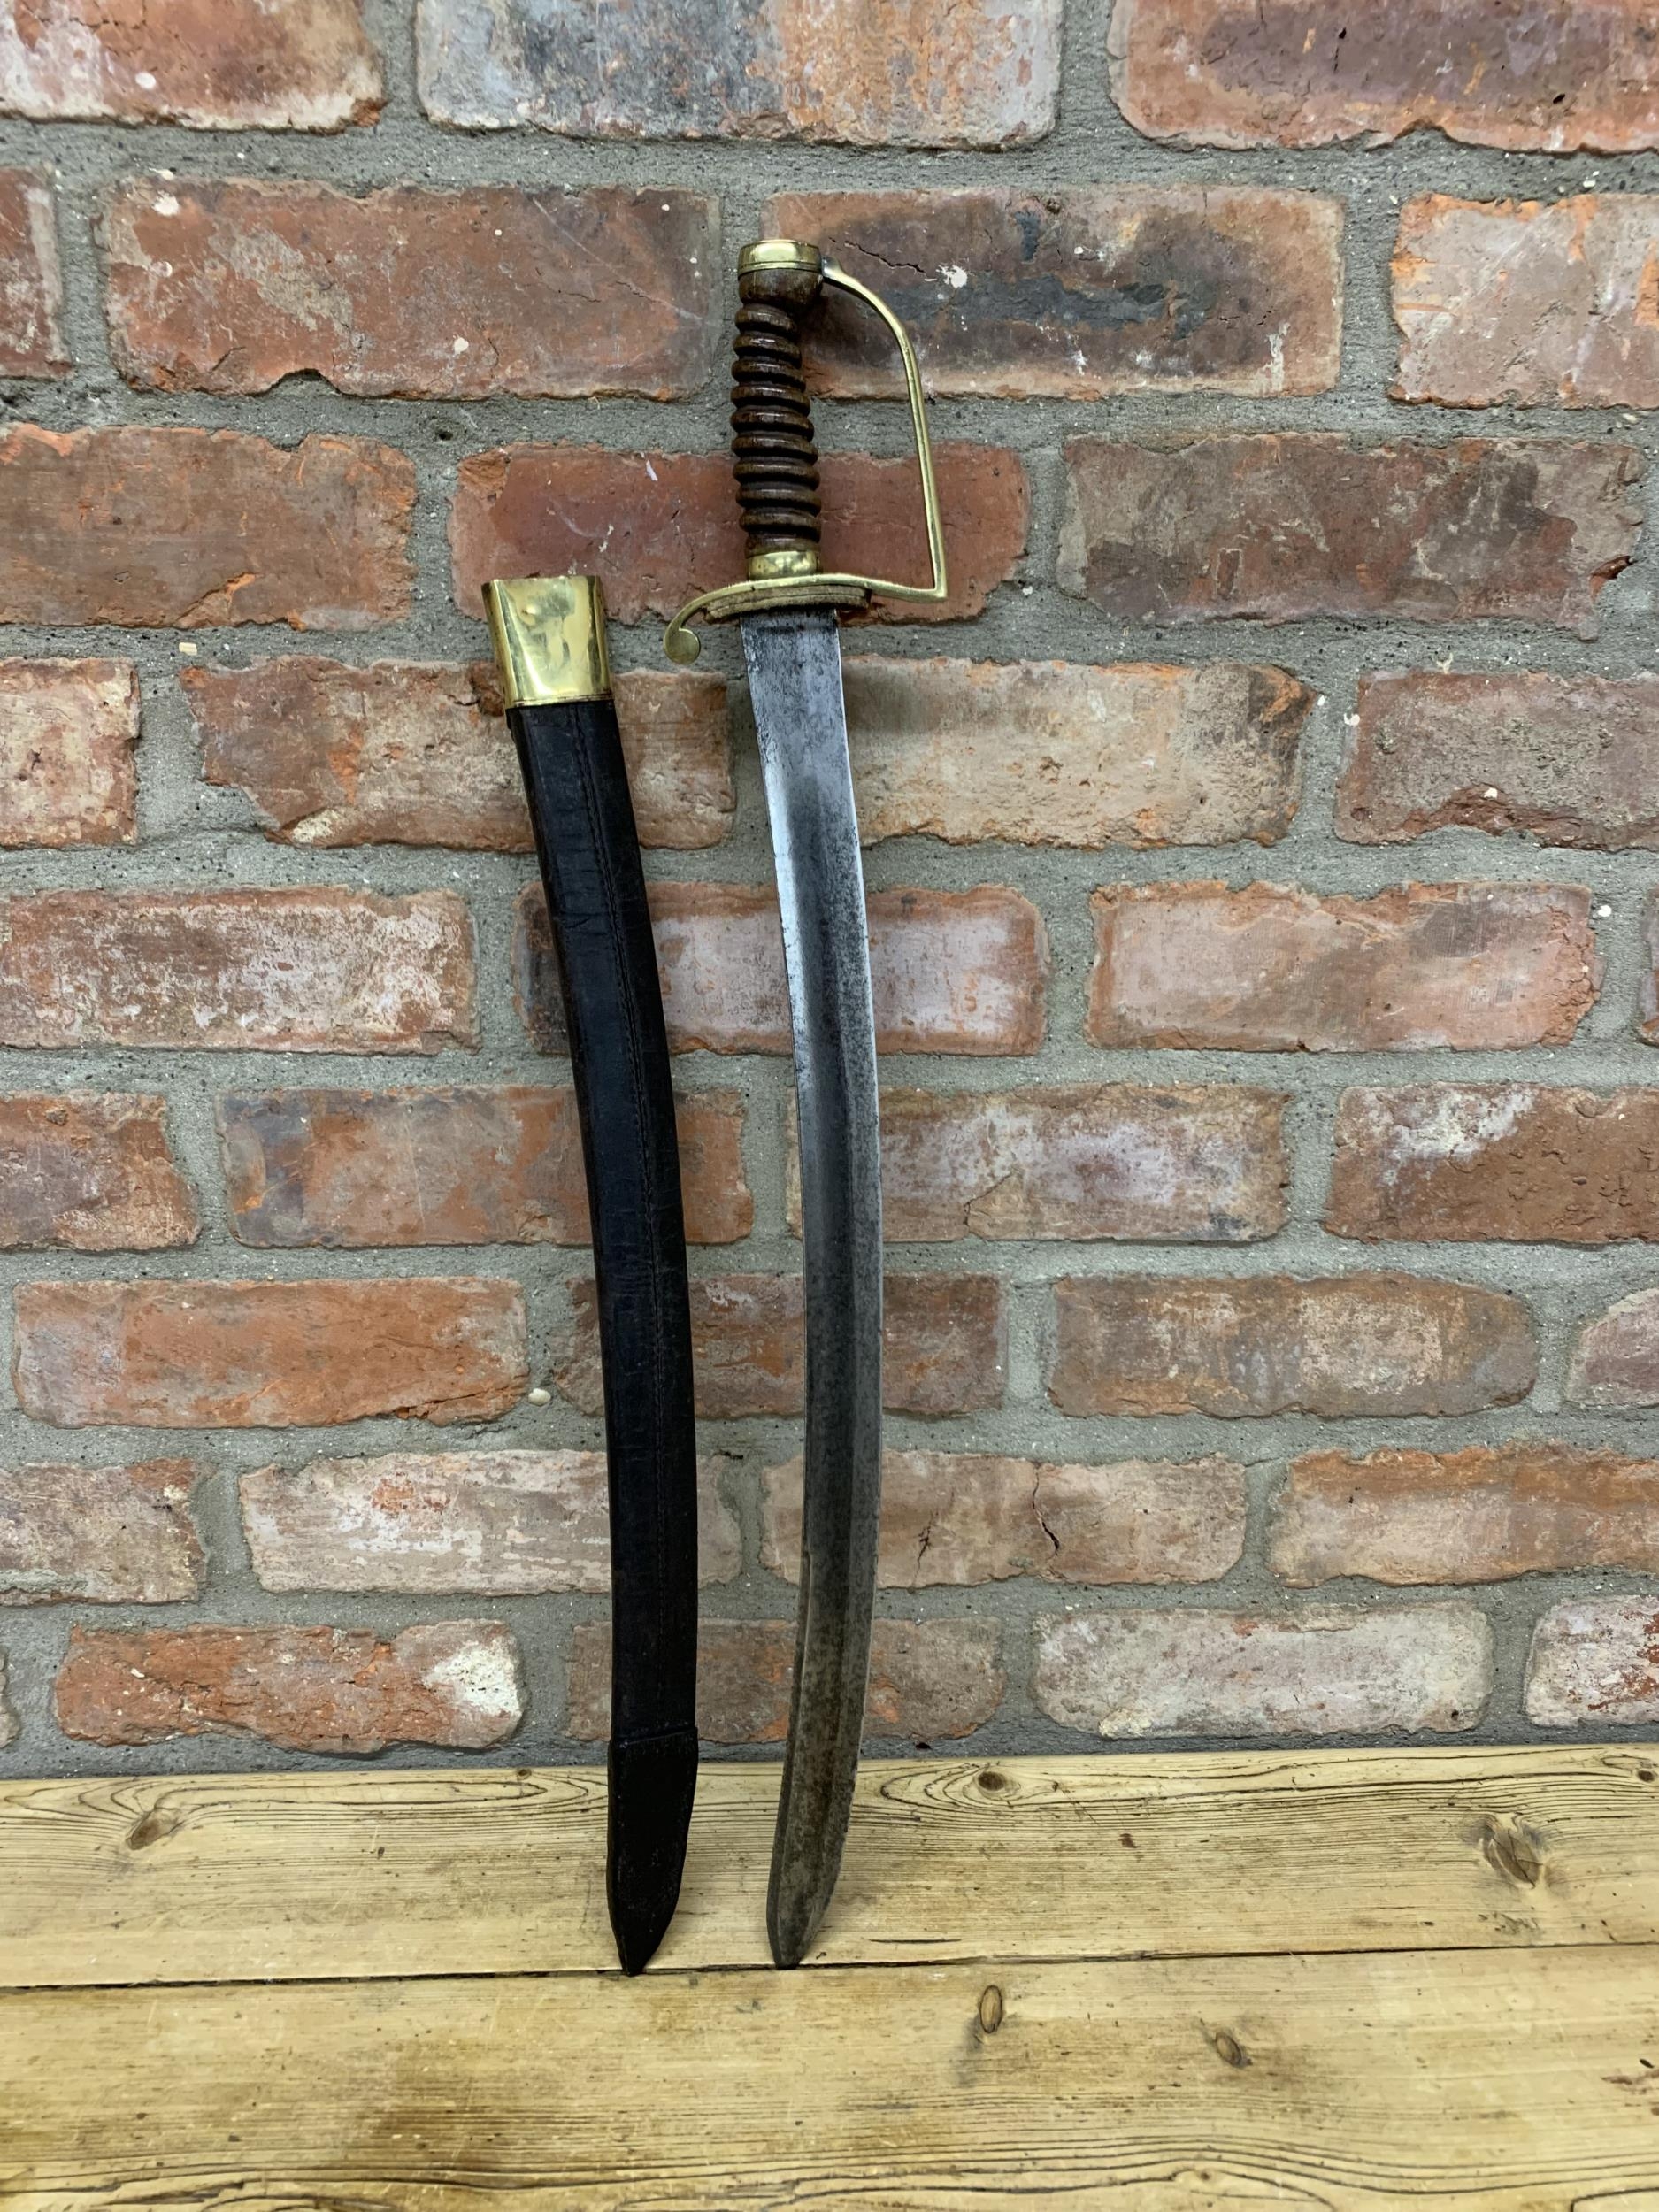 Victorian Constabulary / Prison Wardens short sword with wooden handle, curved fullered blade and